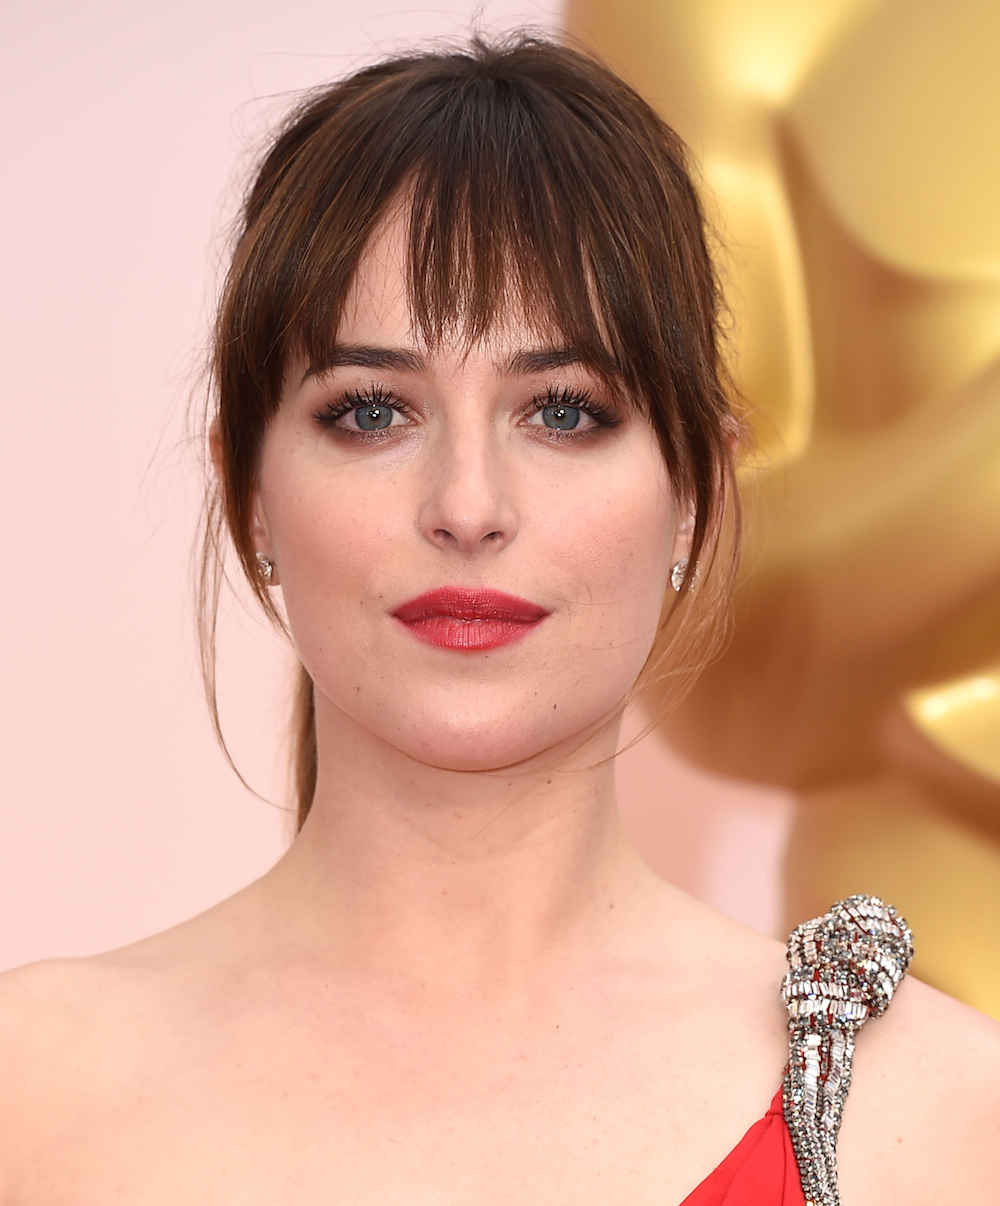 Fifty Shades of Grey Star Dakota Johnson Ditches the Bangs — See Her New Look!